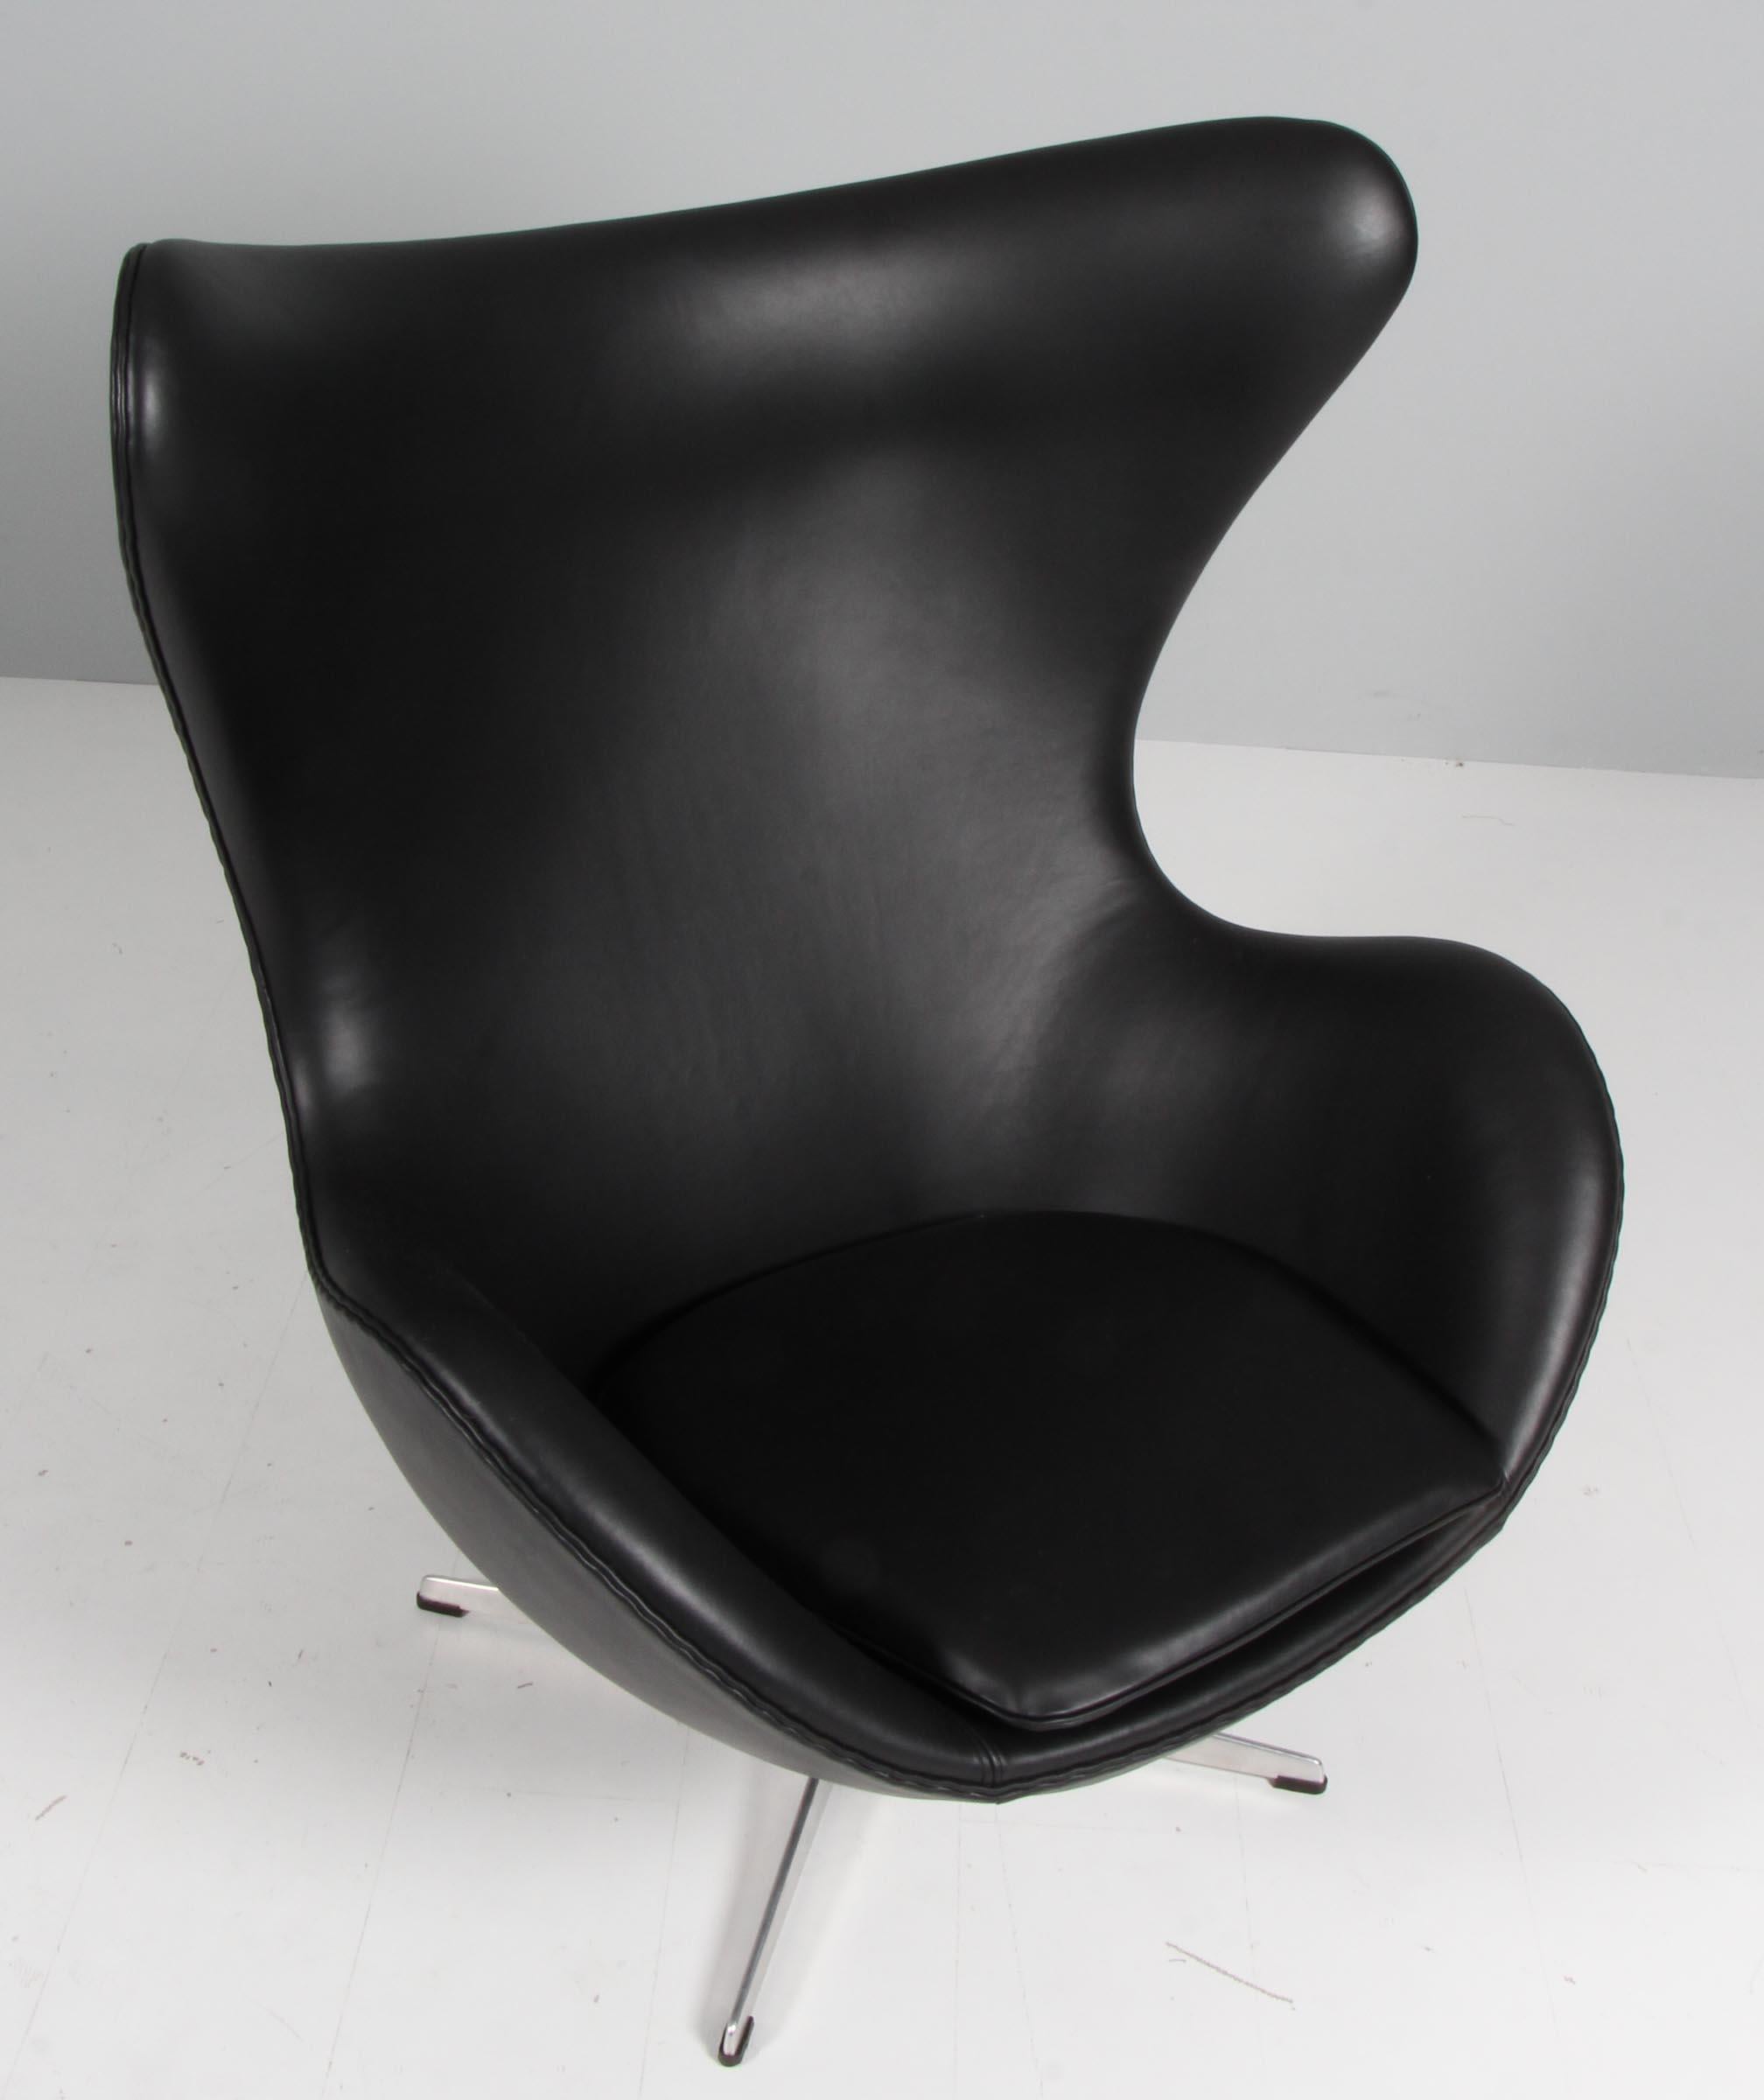 Arne Jacobsen lounge chair model Egg. New upholstered with black butter aniline leather.

Four star base profilated base.

Made by Fritz Hansen.

This iconic chair is one of the most famous chairs in the world and is recognized by design lovers in